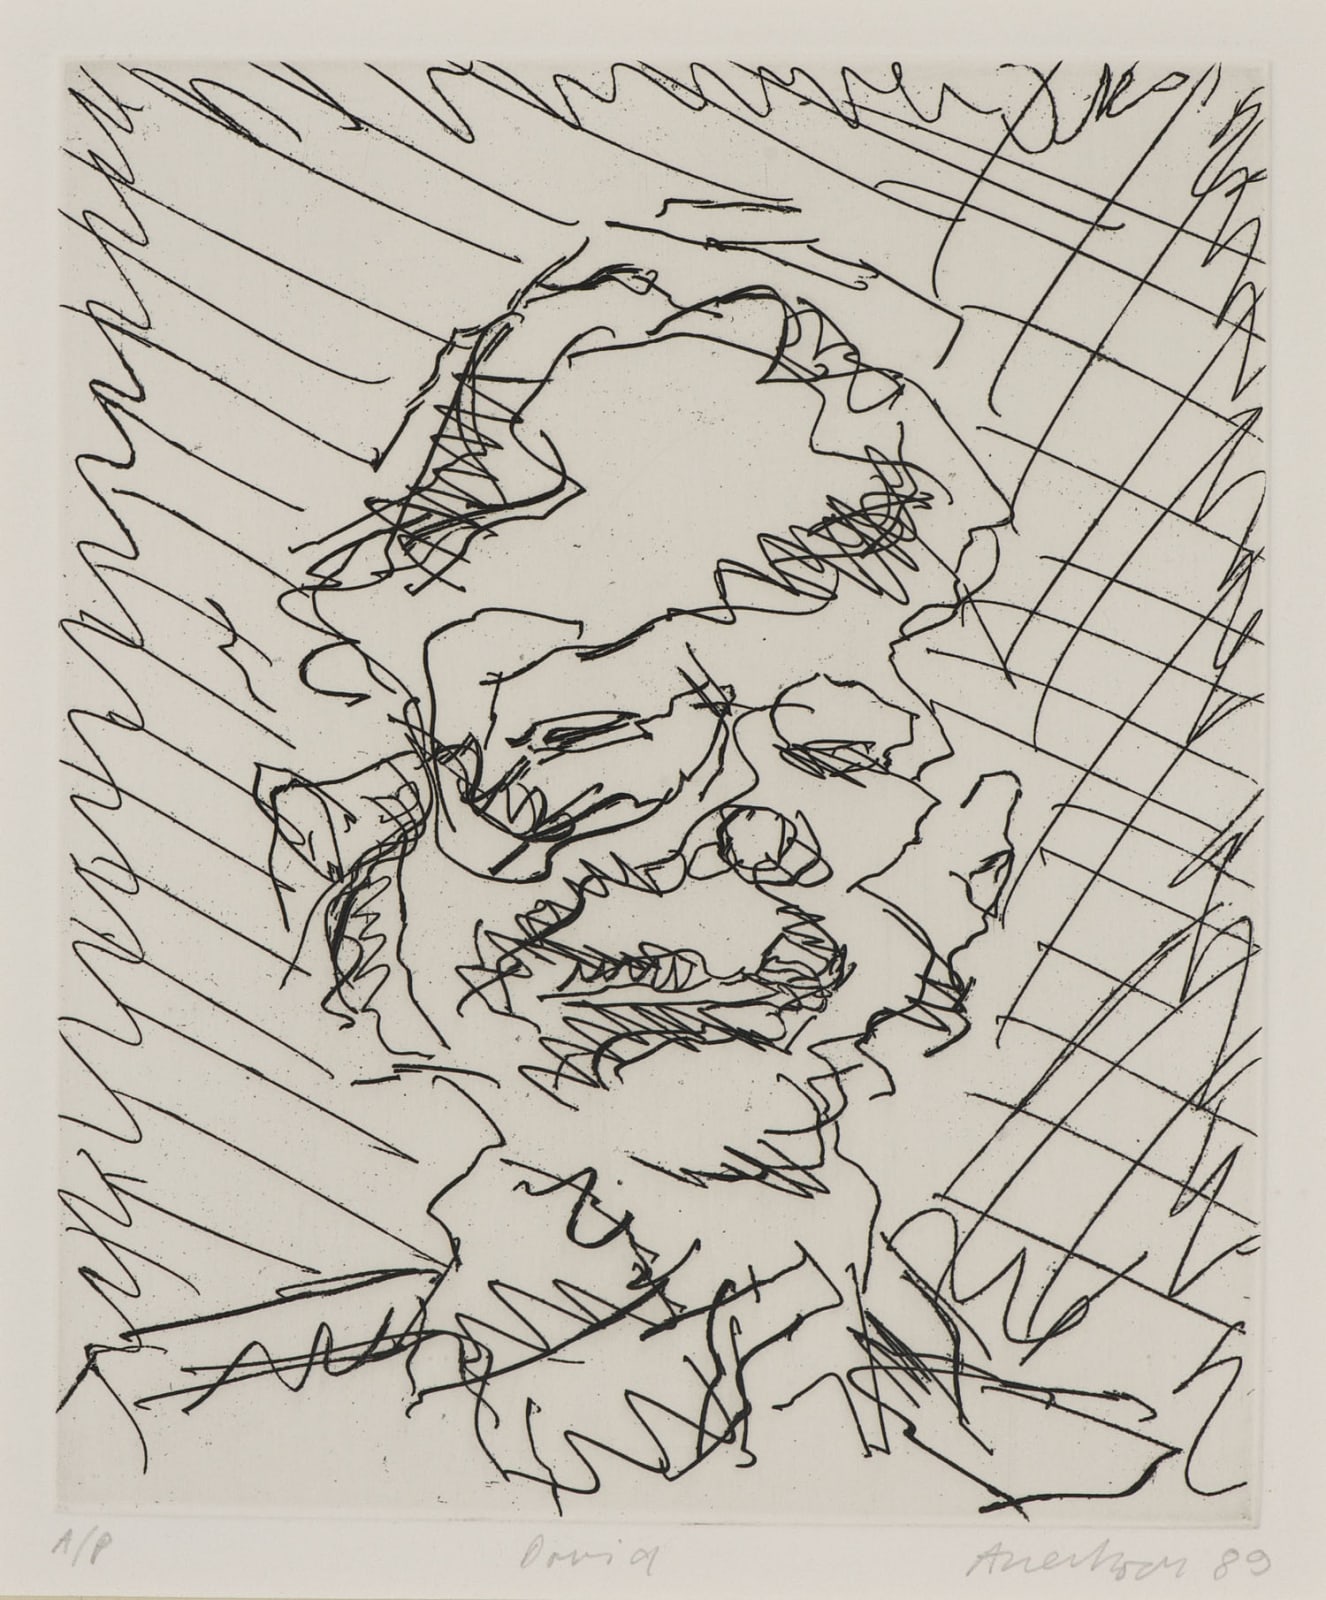 Frank Auerbach (1931-) David 1989 Etching, printed on Somerset white paper, artist's proof outside the published edition of 50 19.3 x 16.3 cm Ben Uri Collection © Frank Auerbach, courtesy Marlborough Fine Art To see and discover more about this artist click here